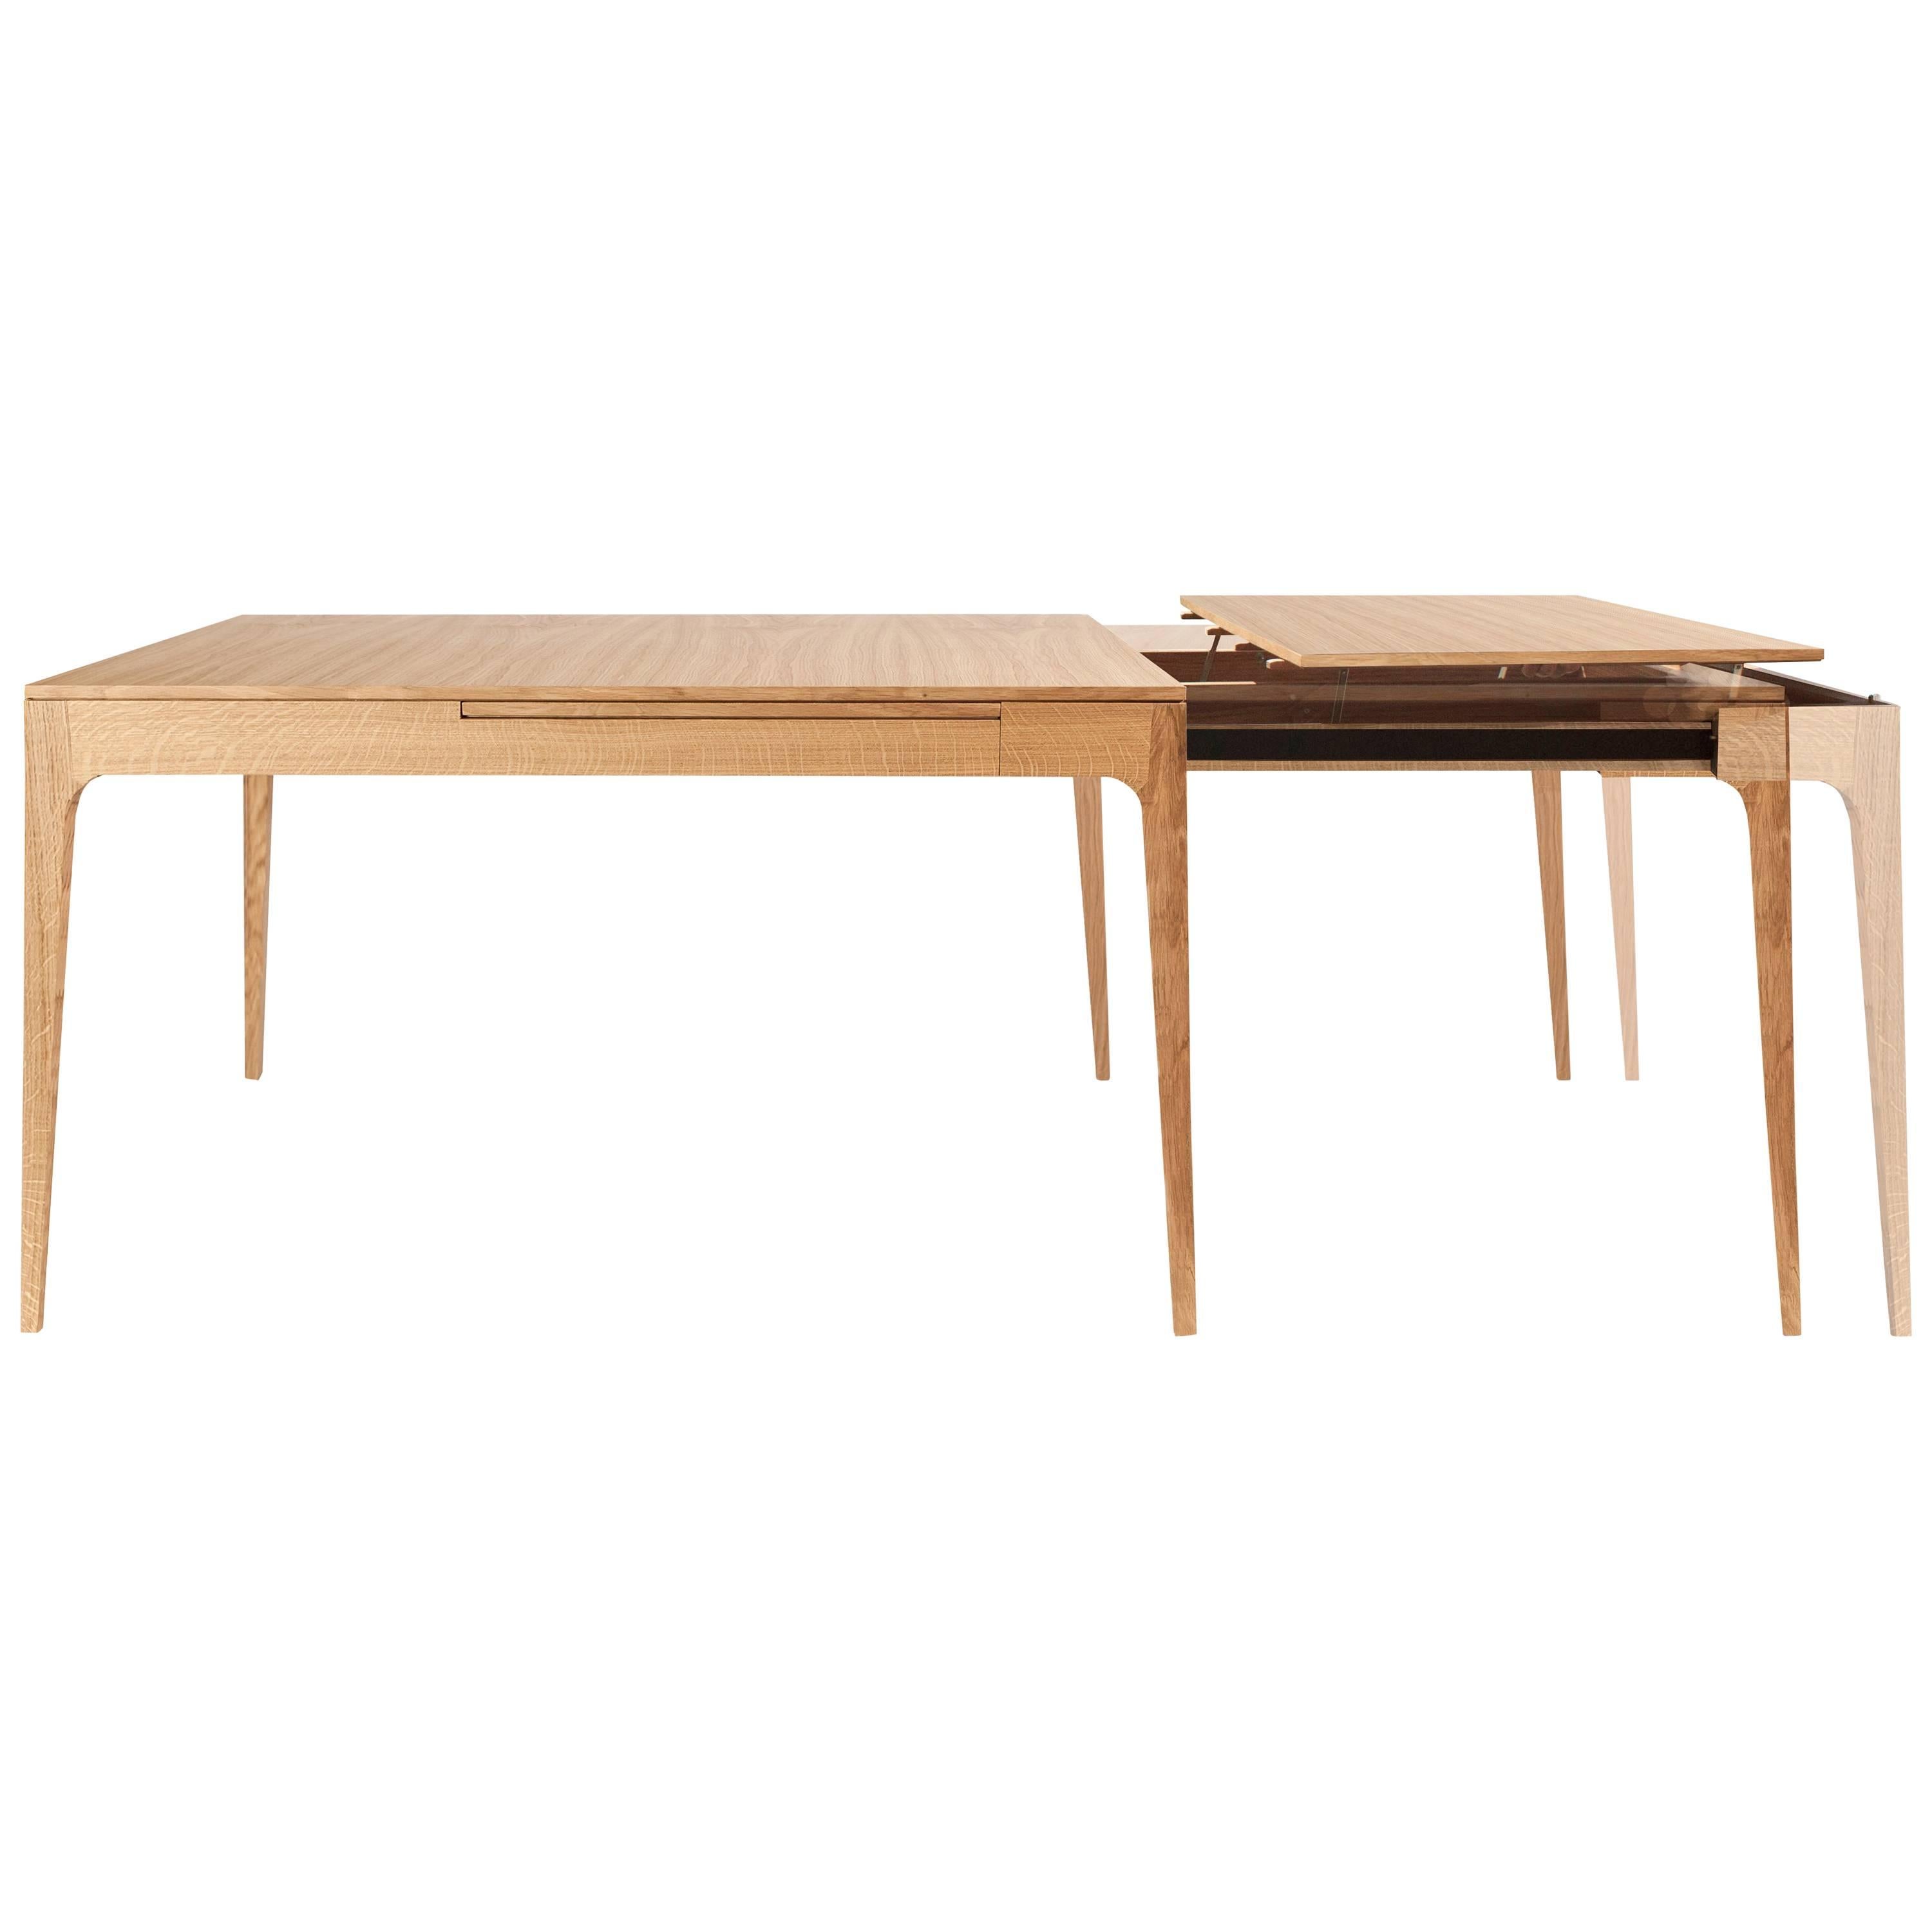 Extendable large dining oak table from "Campagnon de France", Scandinavian style